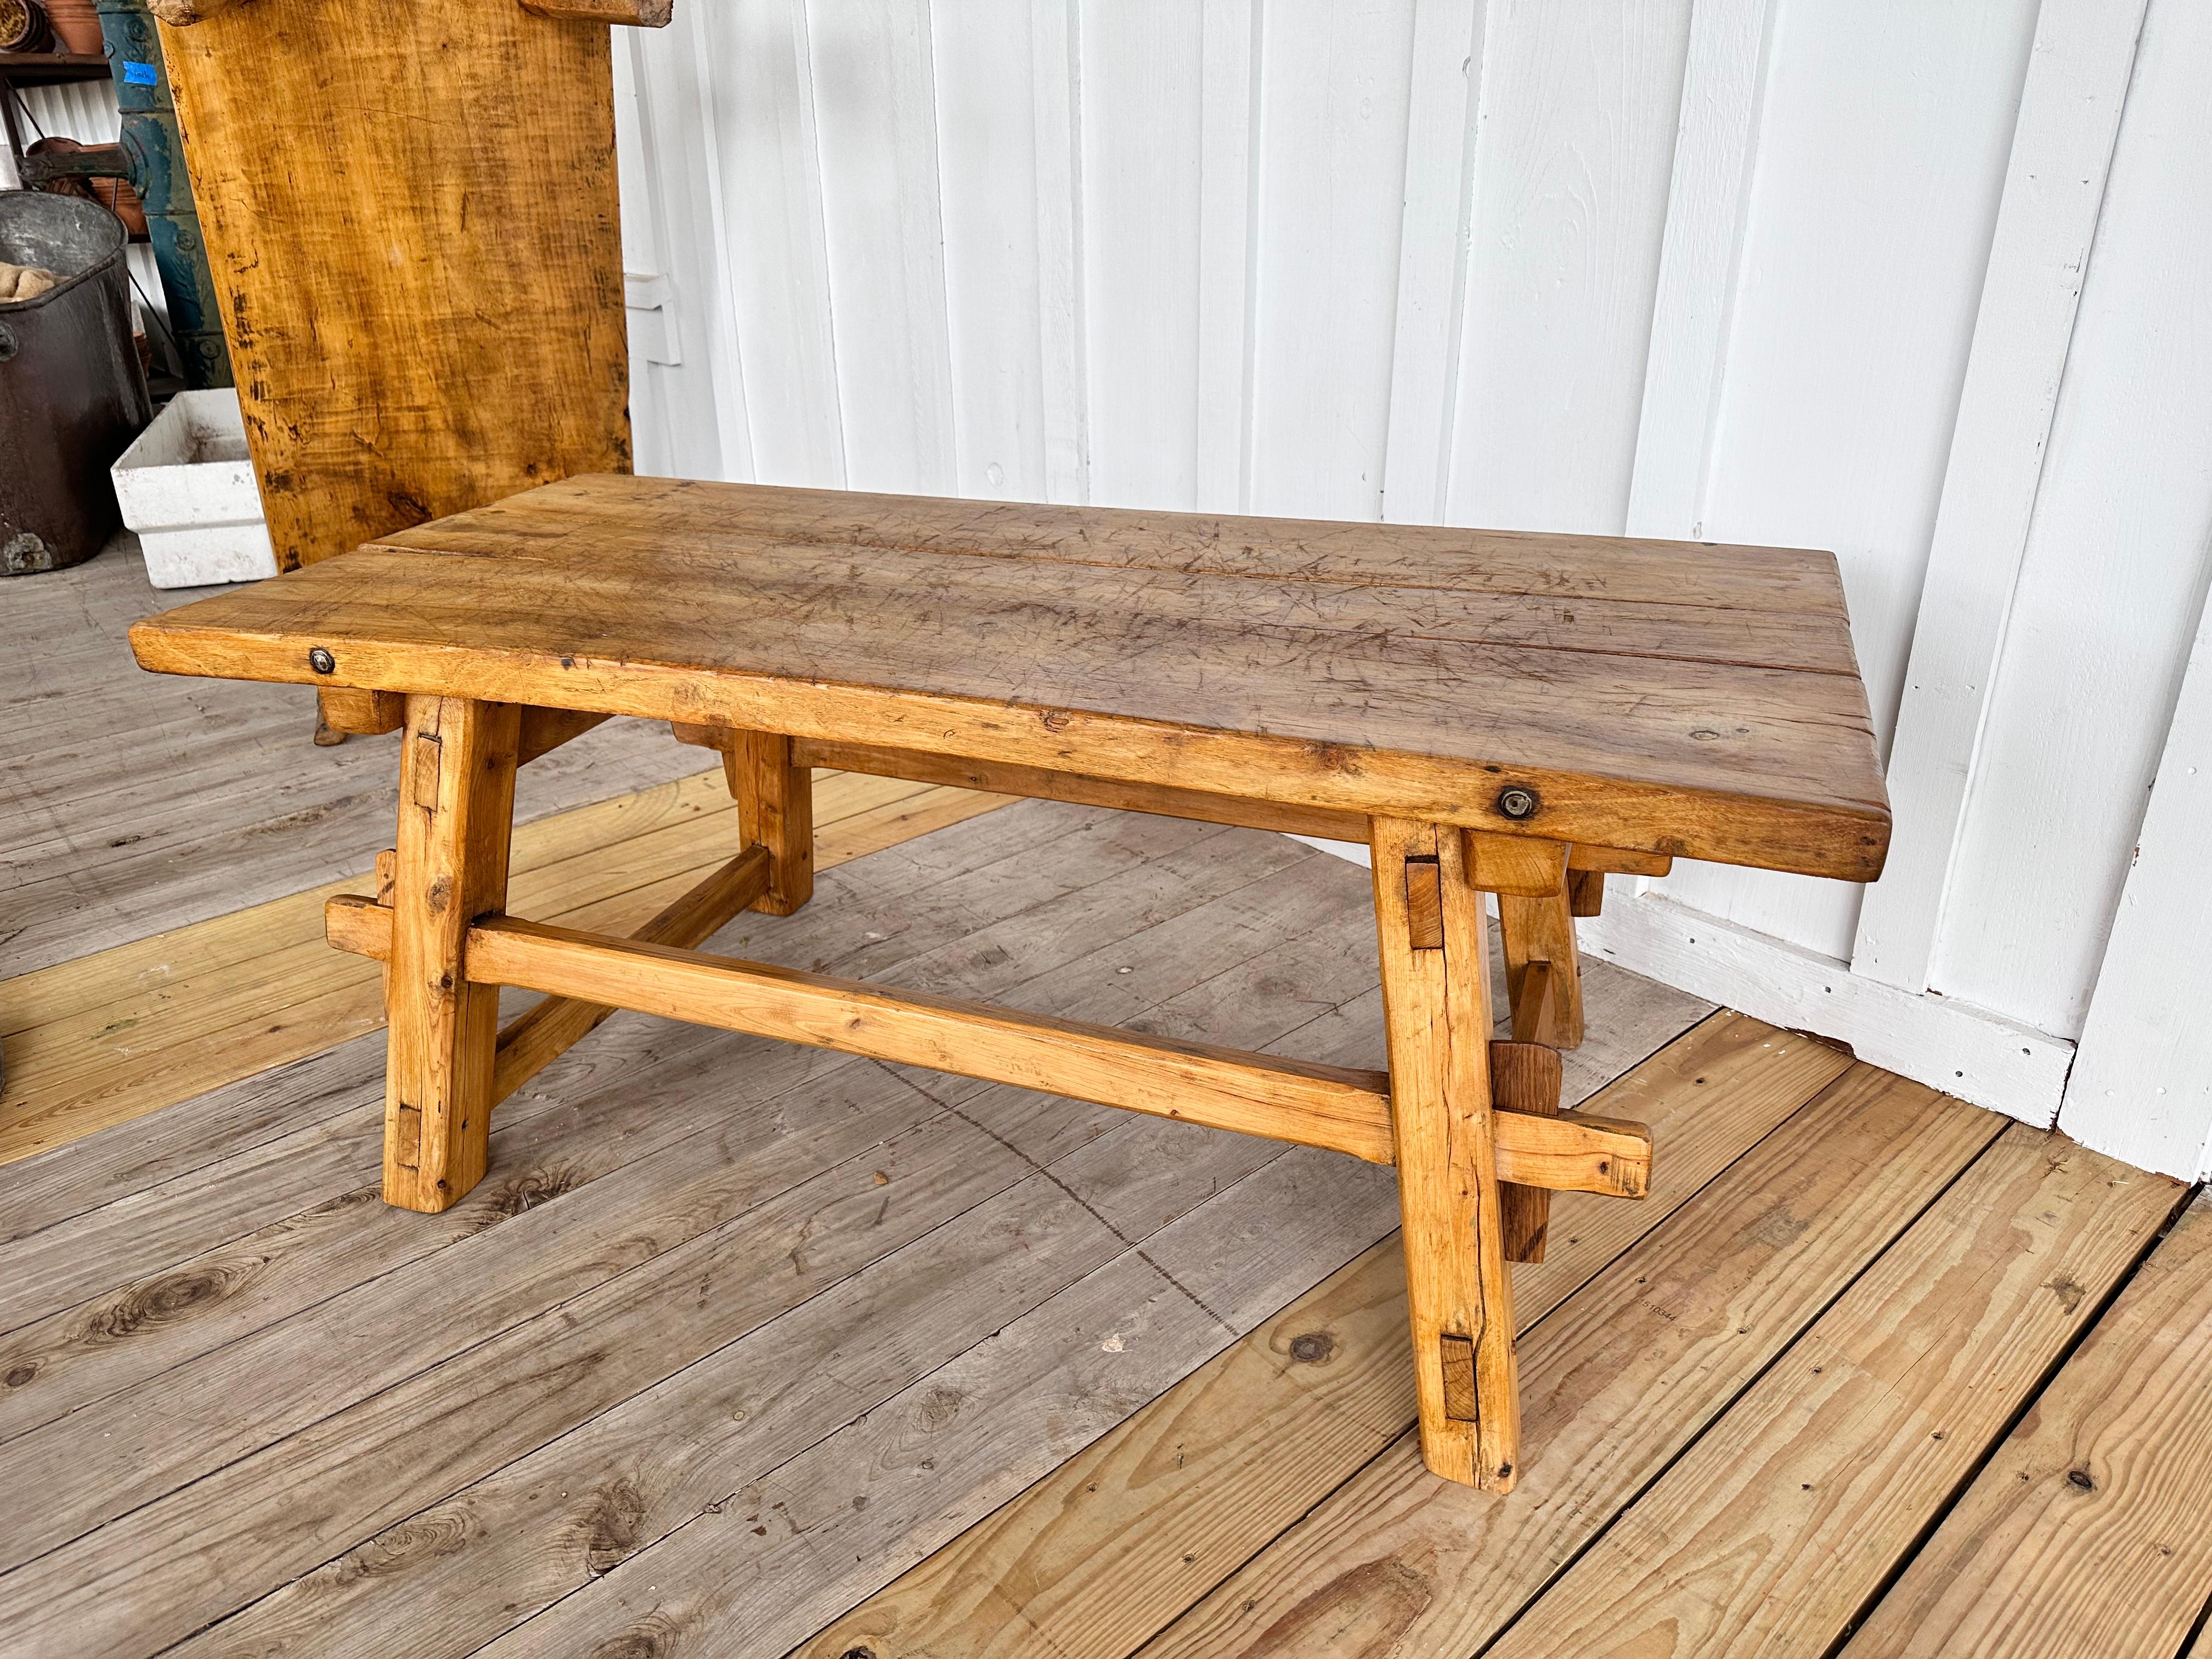 This 19th century coffee table is simple yet beautiful! This piece was orginial used as a butcher's chopping table and has been since cut down to coffee table size. The years of use have created great patina as well as unique detail on the top. The